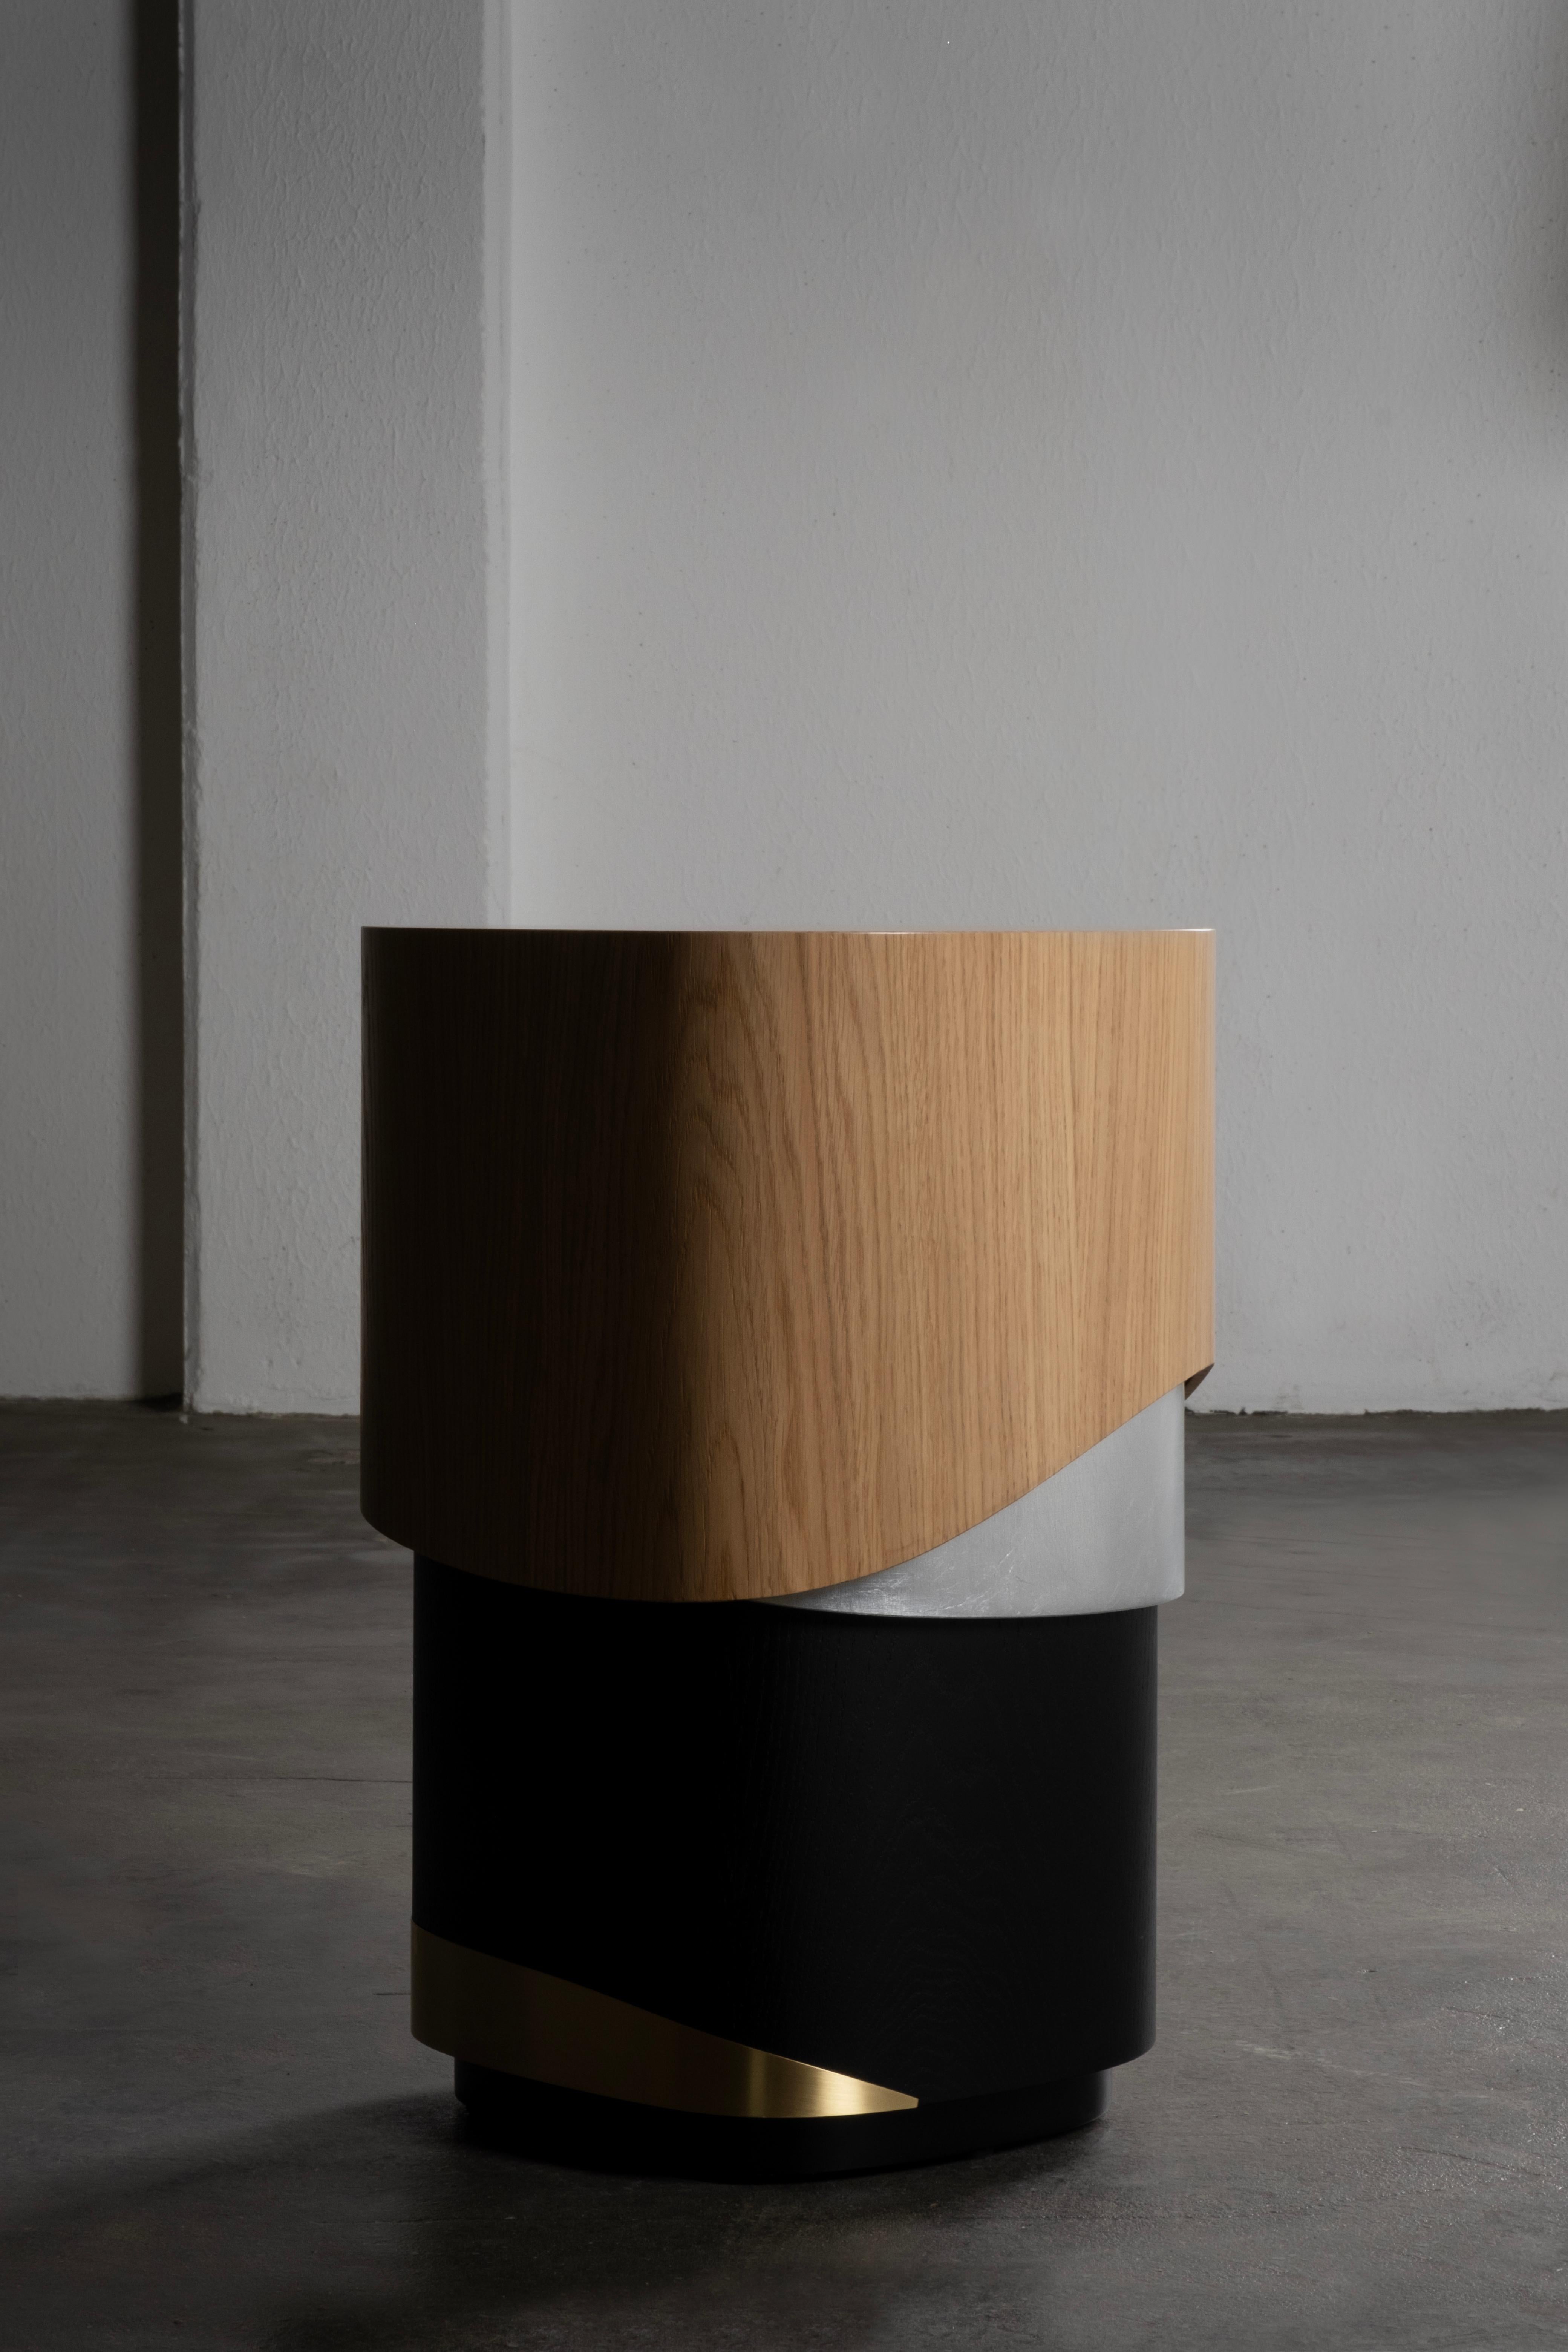 Sistelo Side Table, Contemporary Collection, Handcrafted in Portugal - Europe by Greenapple.

The Sistelo side table draws inspiration from the captivating landscape of Sistelo, emerging as a tribute to the hidden gem on the outskirts of the